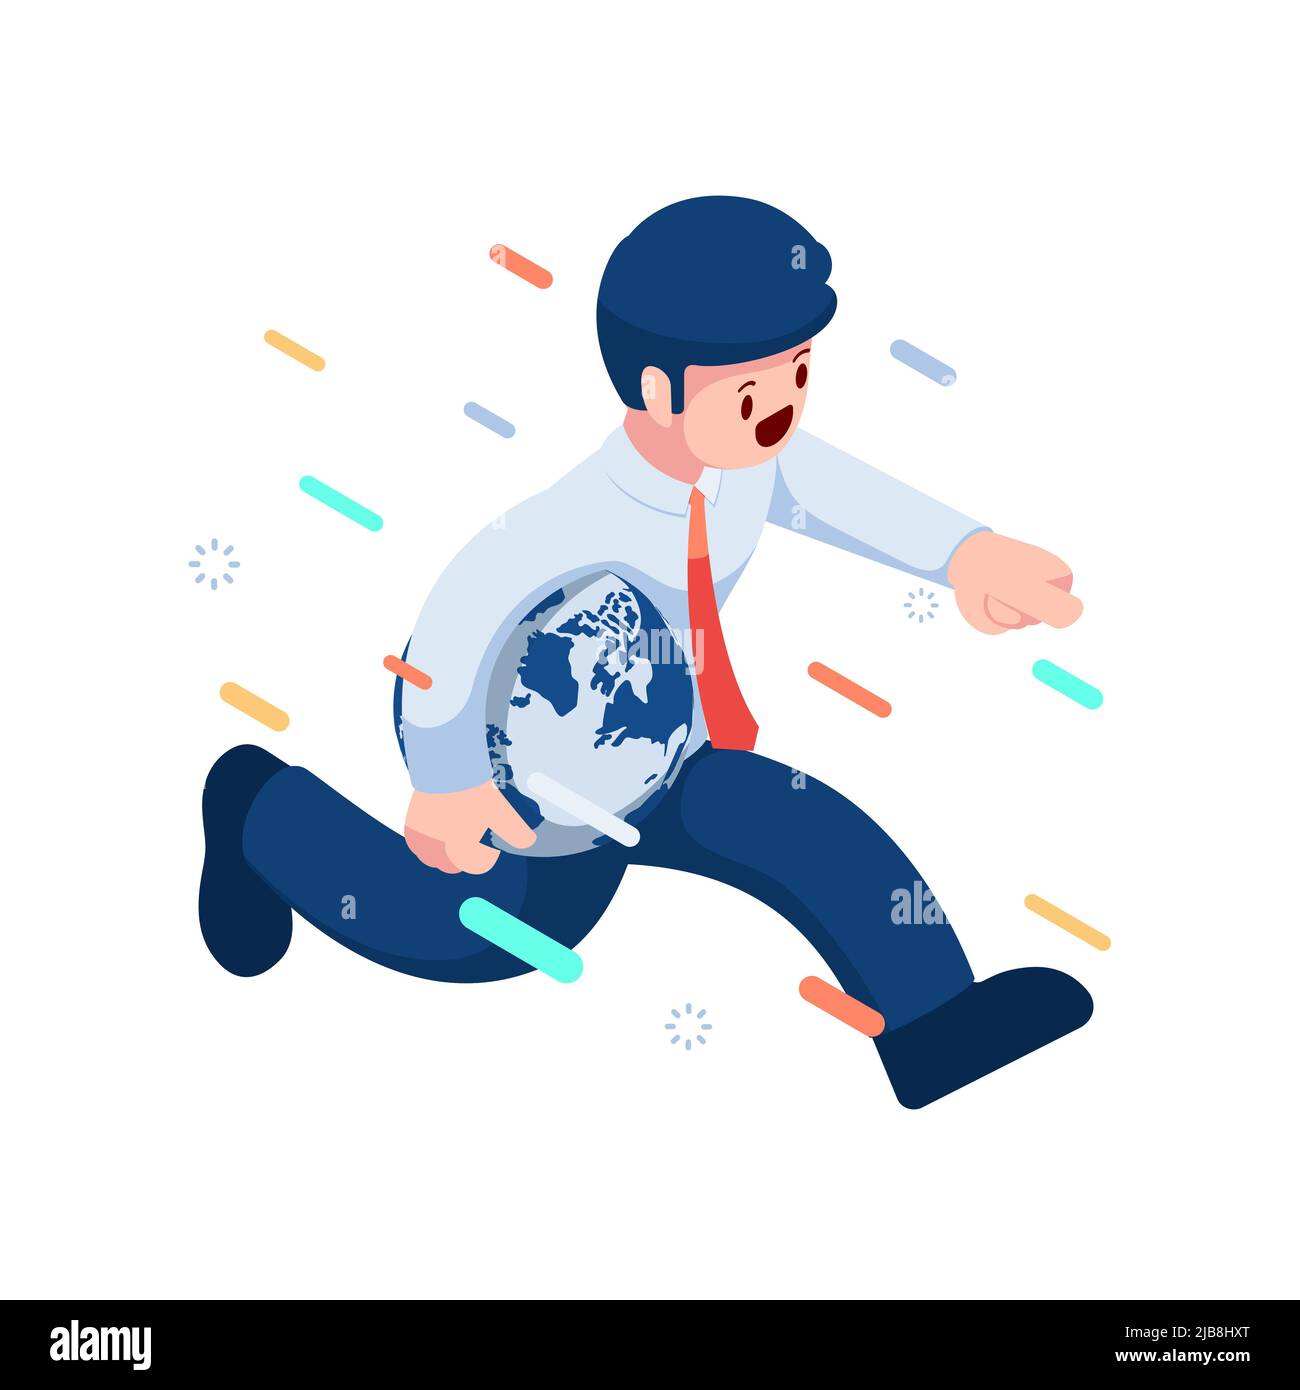 Flat 3d Isometric Businessman Carry World Globe and Running Forward. World Wide Business Concept. Stock Vector